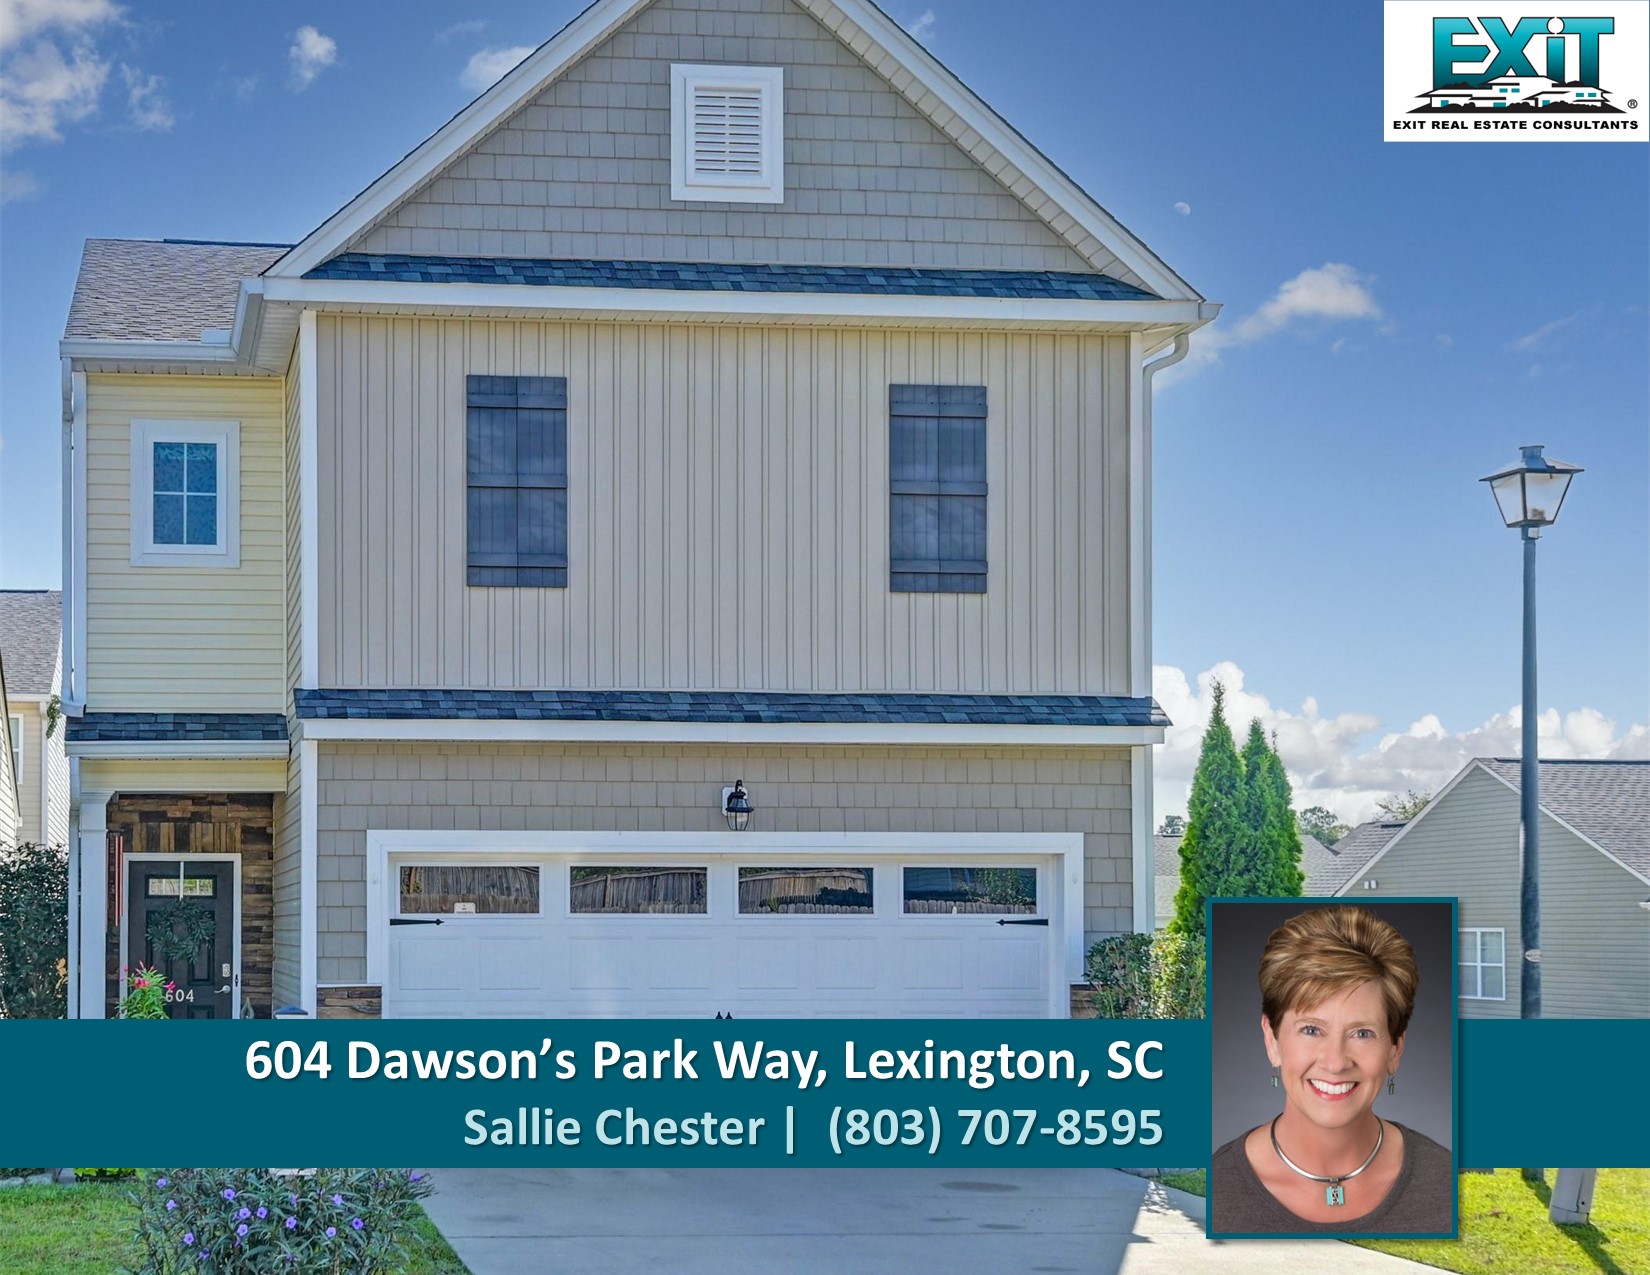 Just listed in Dawson's Park